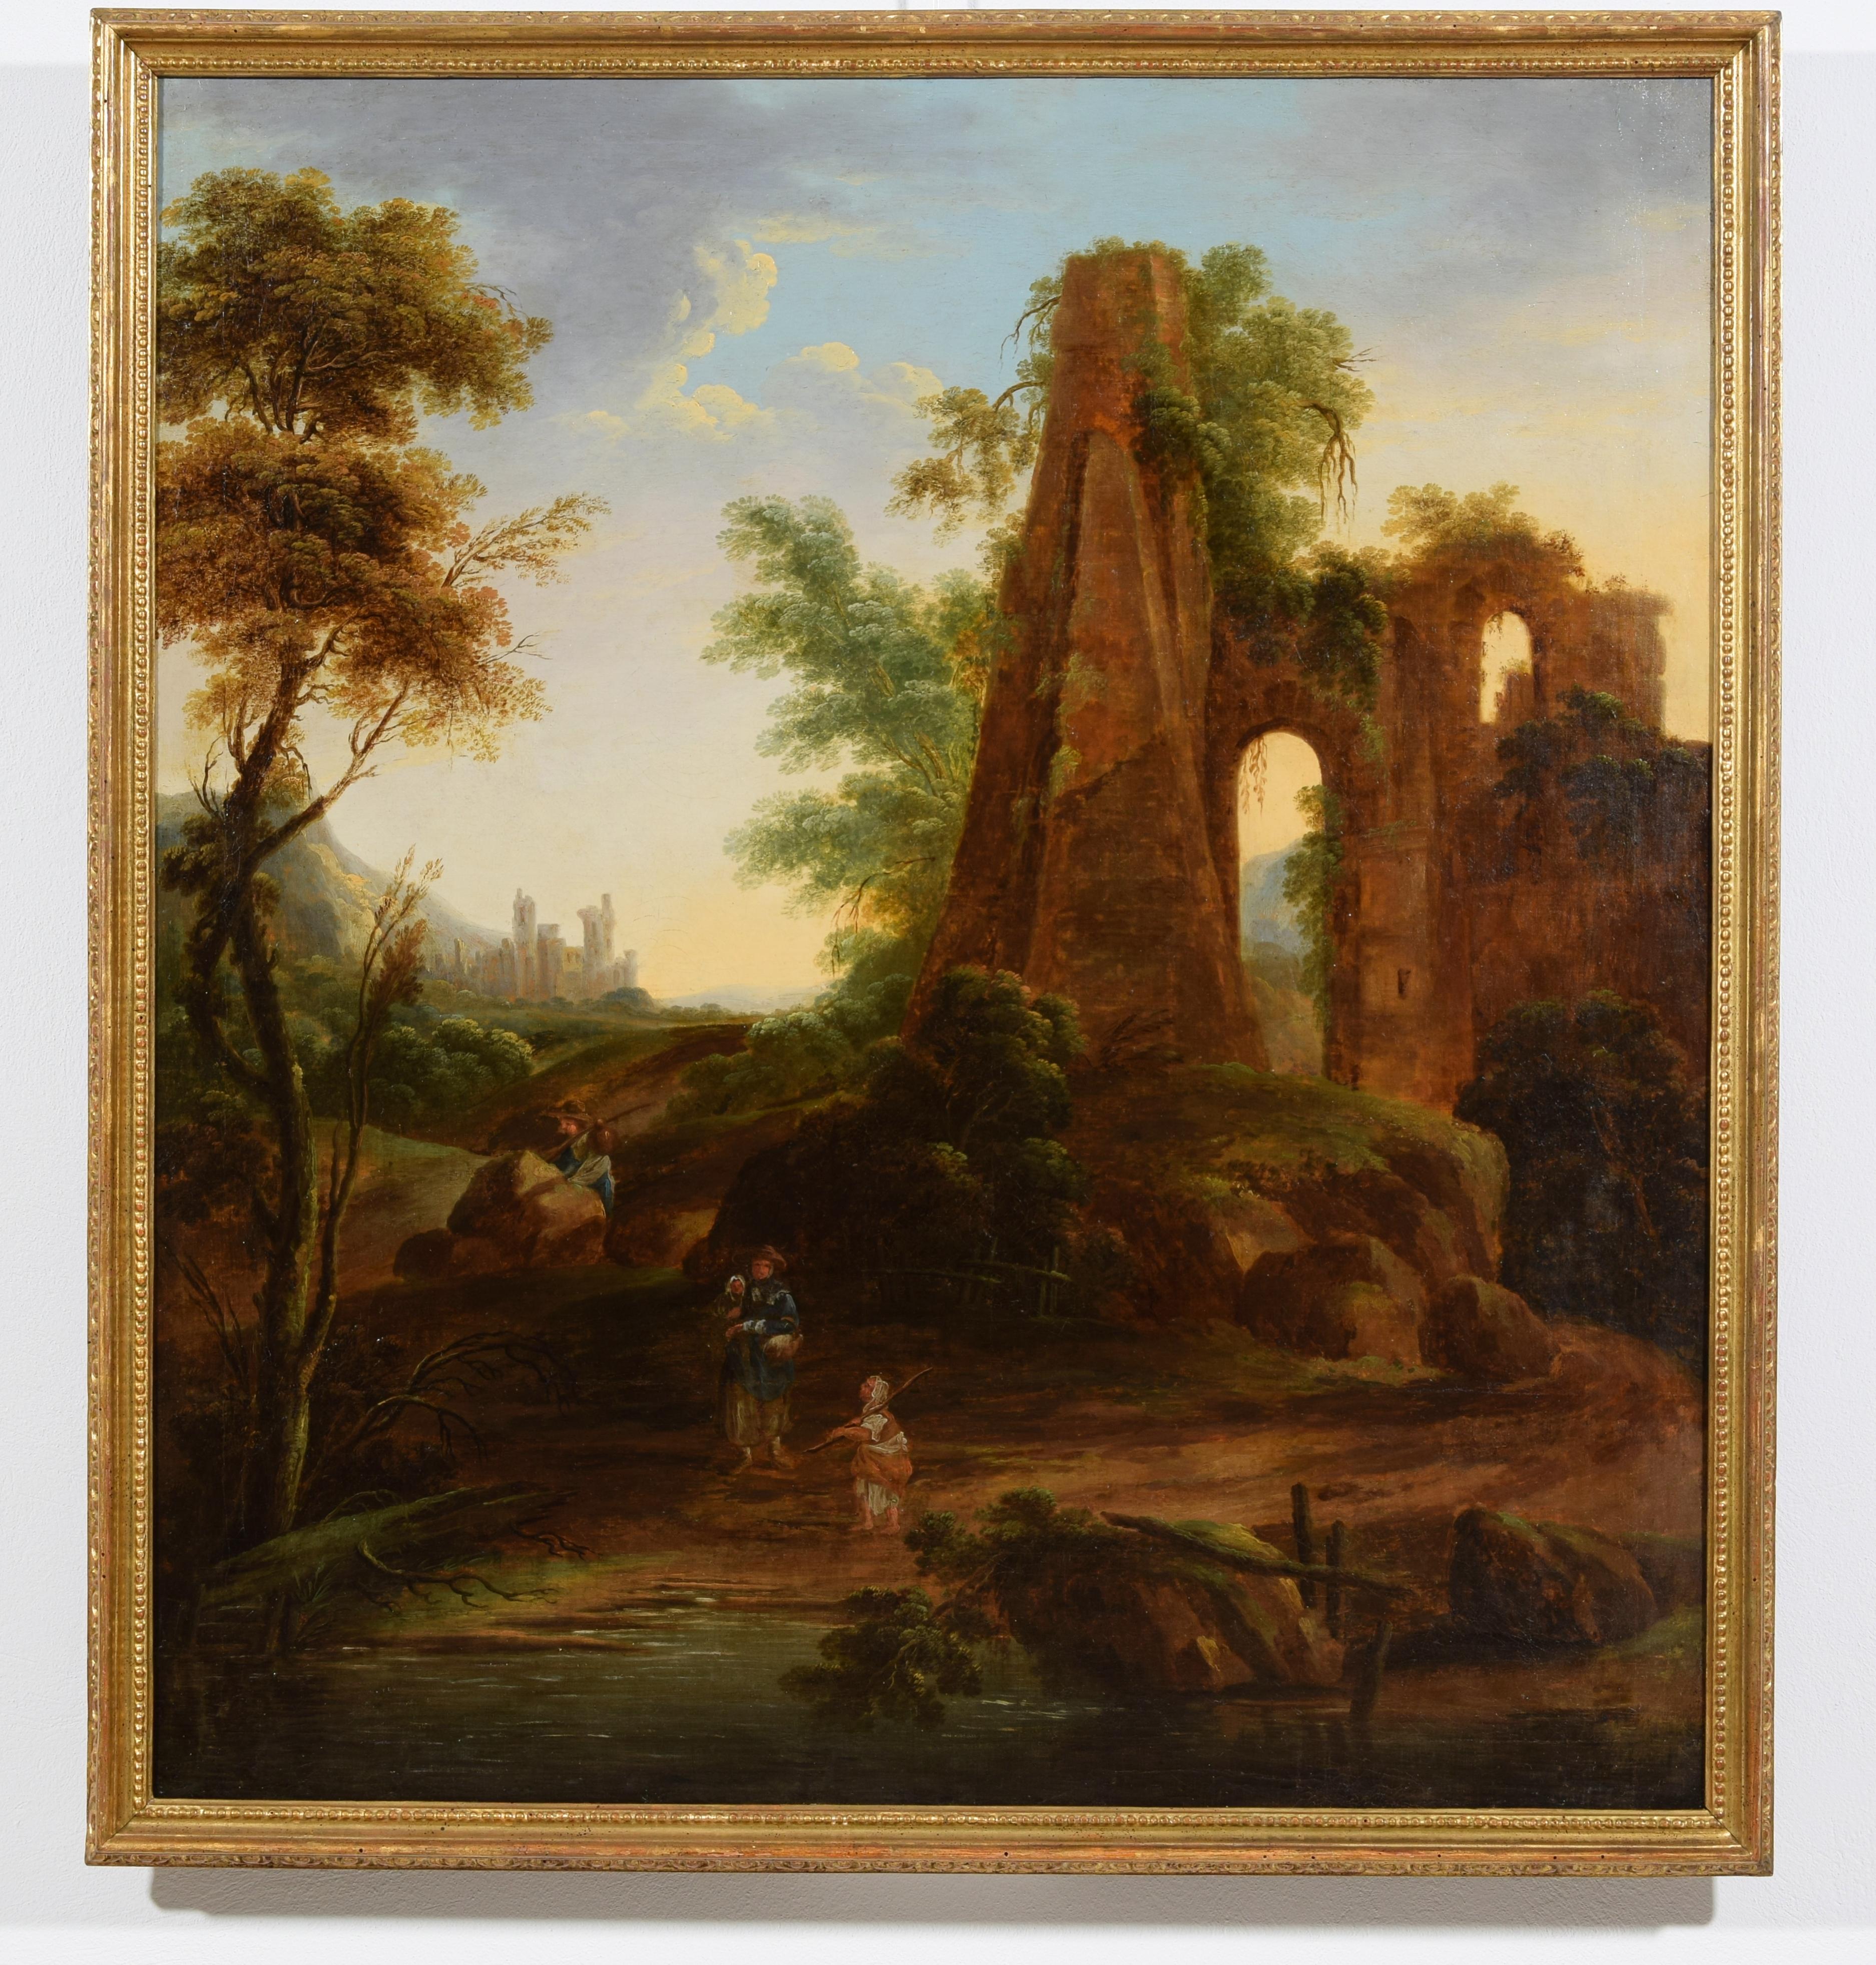 18th century, Italian oil on canvas painting with landscape with ruins

Measures: only the canvas cm W 97.5 x H 108; with the frame cm W 103.5 x H 114 x D 5

The fine oil on canvas painting depicts a landscape of the Italian countryside with